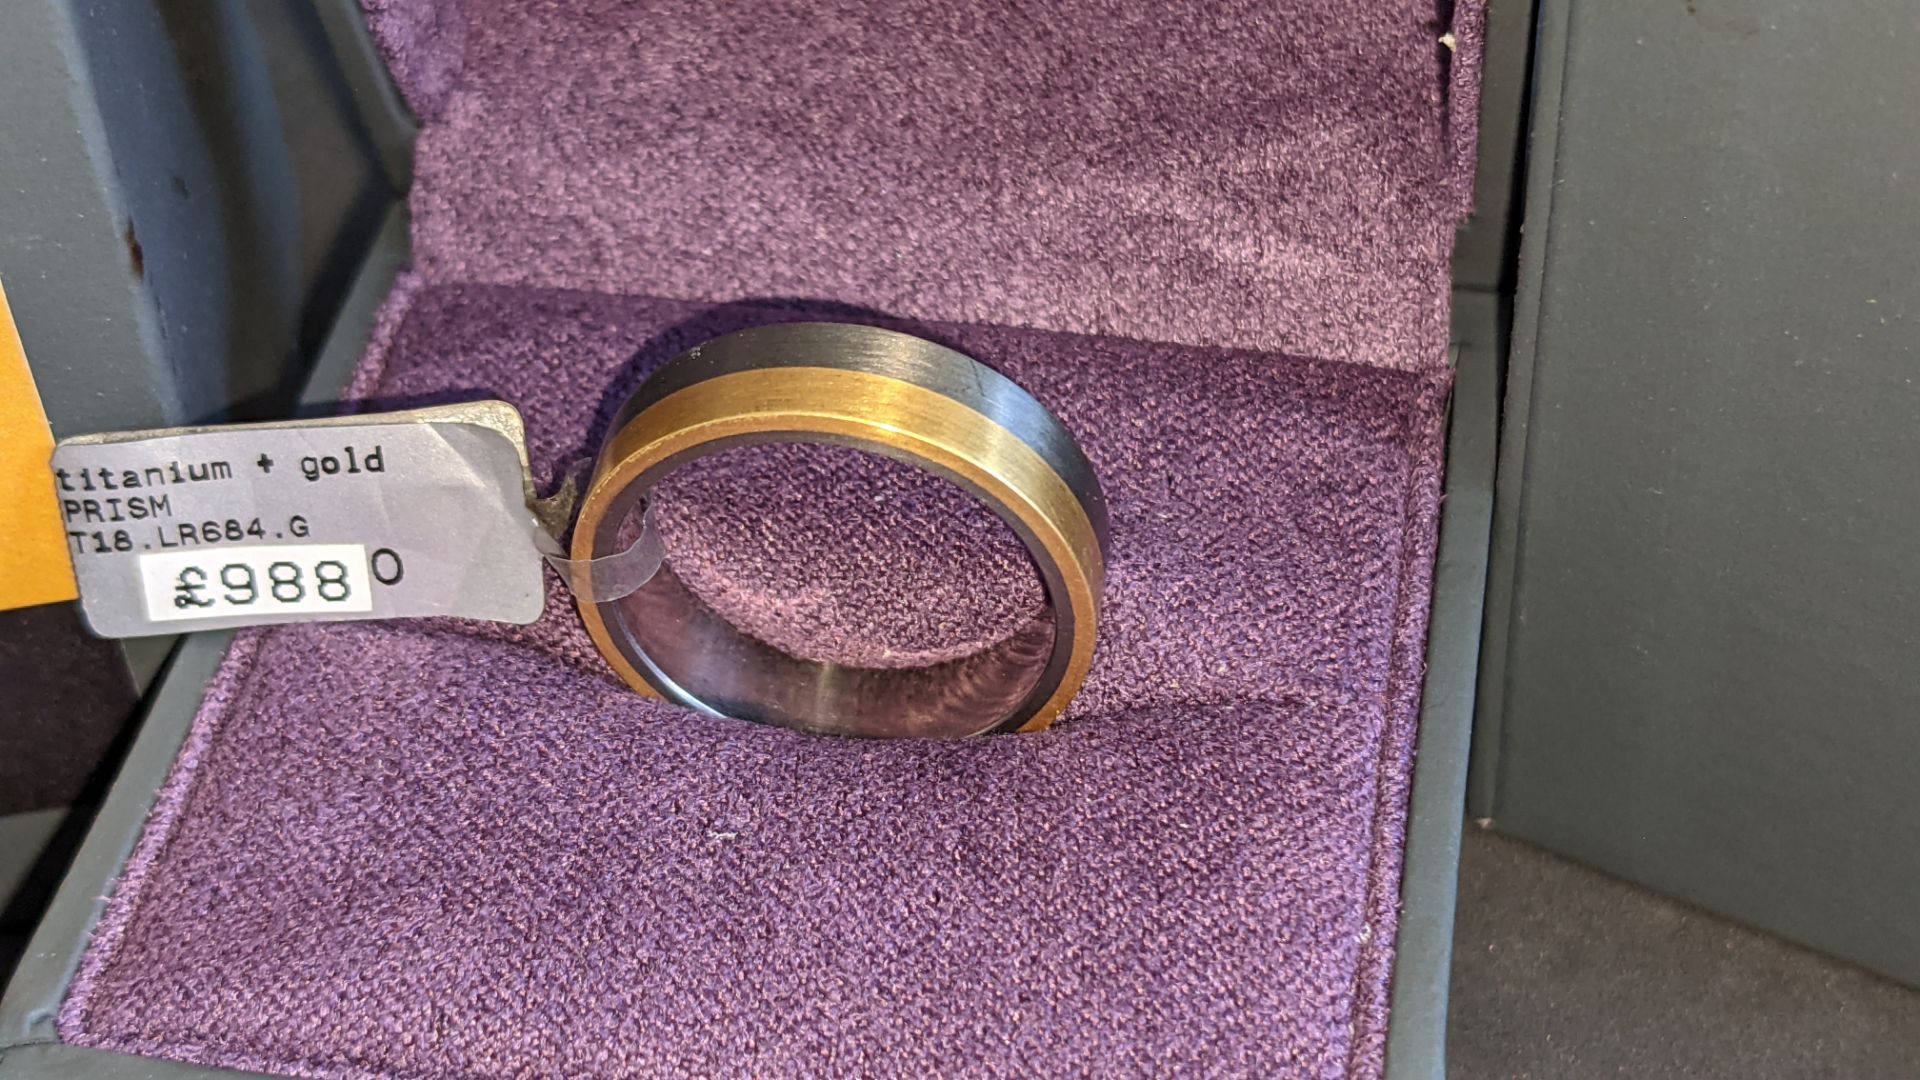 Titanium & 18ct yellow gold 6mm ring RRP £988 - Image 7 of 15